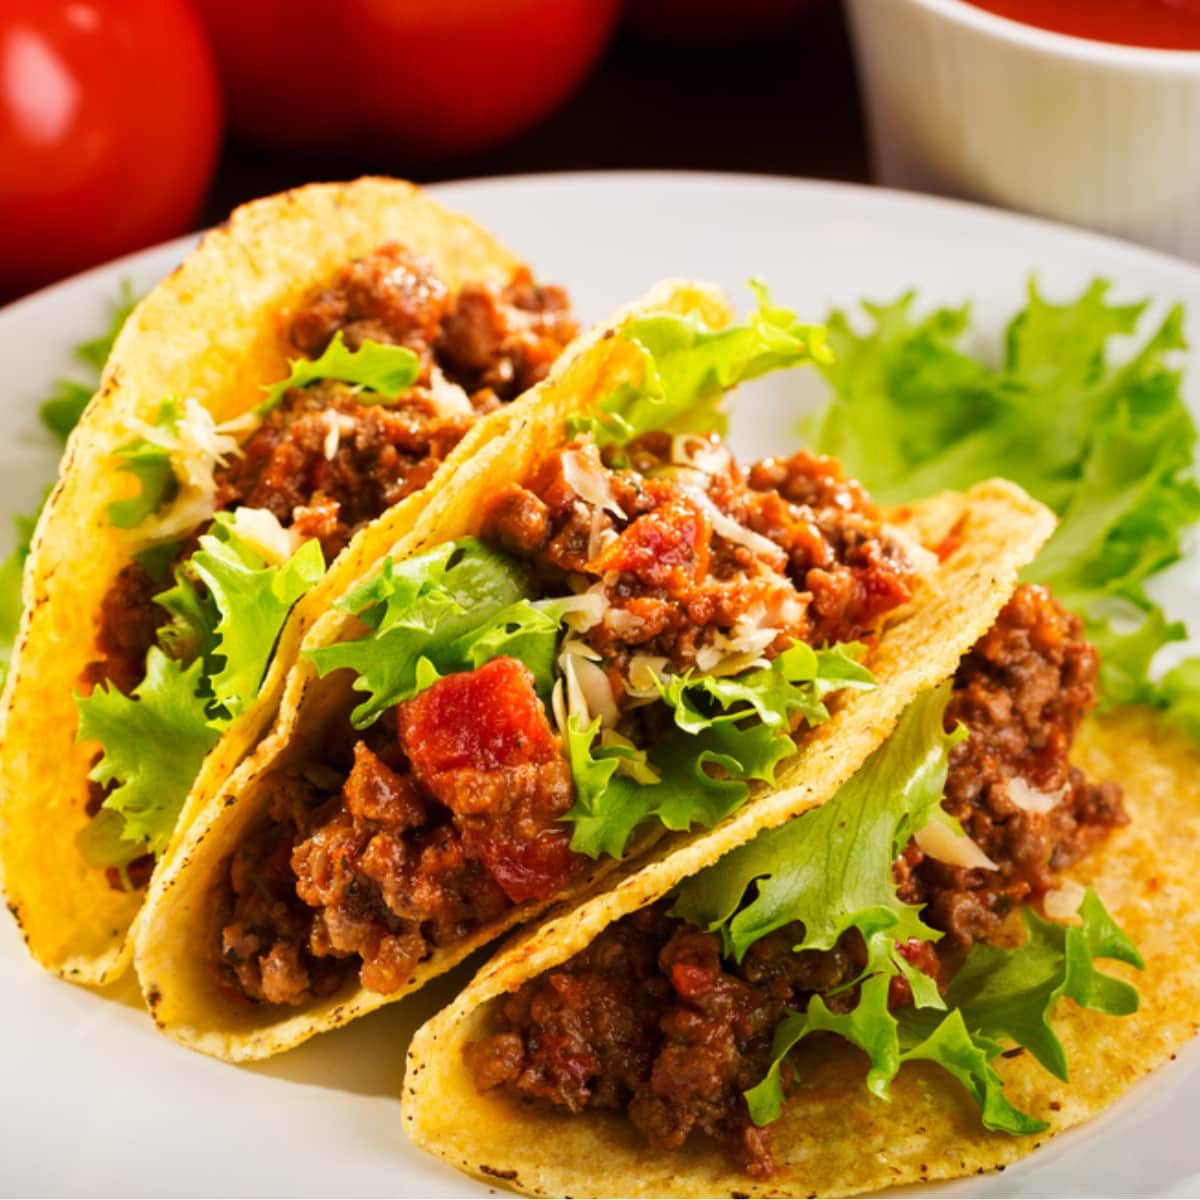 Meaty Beef Tacos with Lettuce and Tomatoes